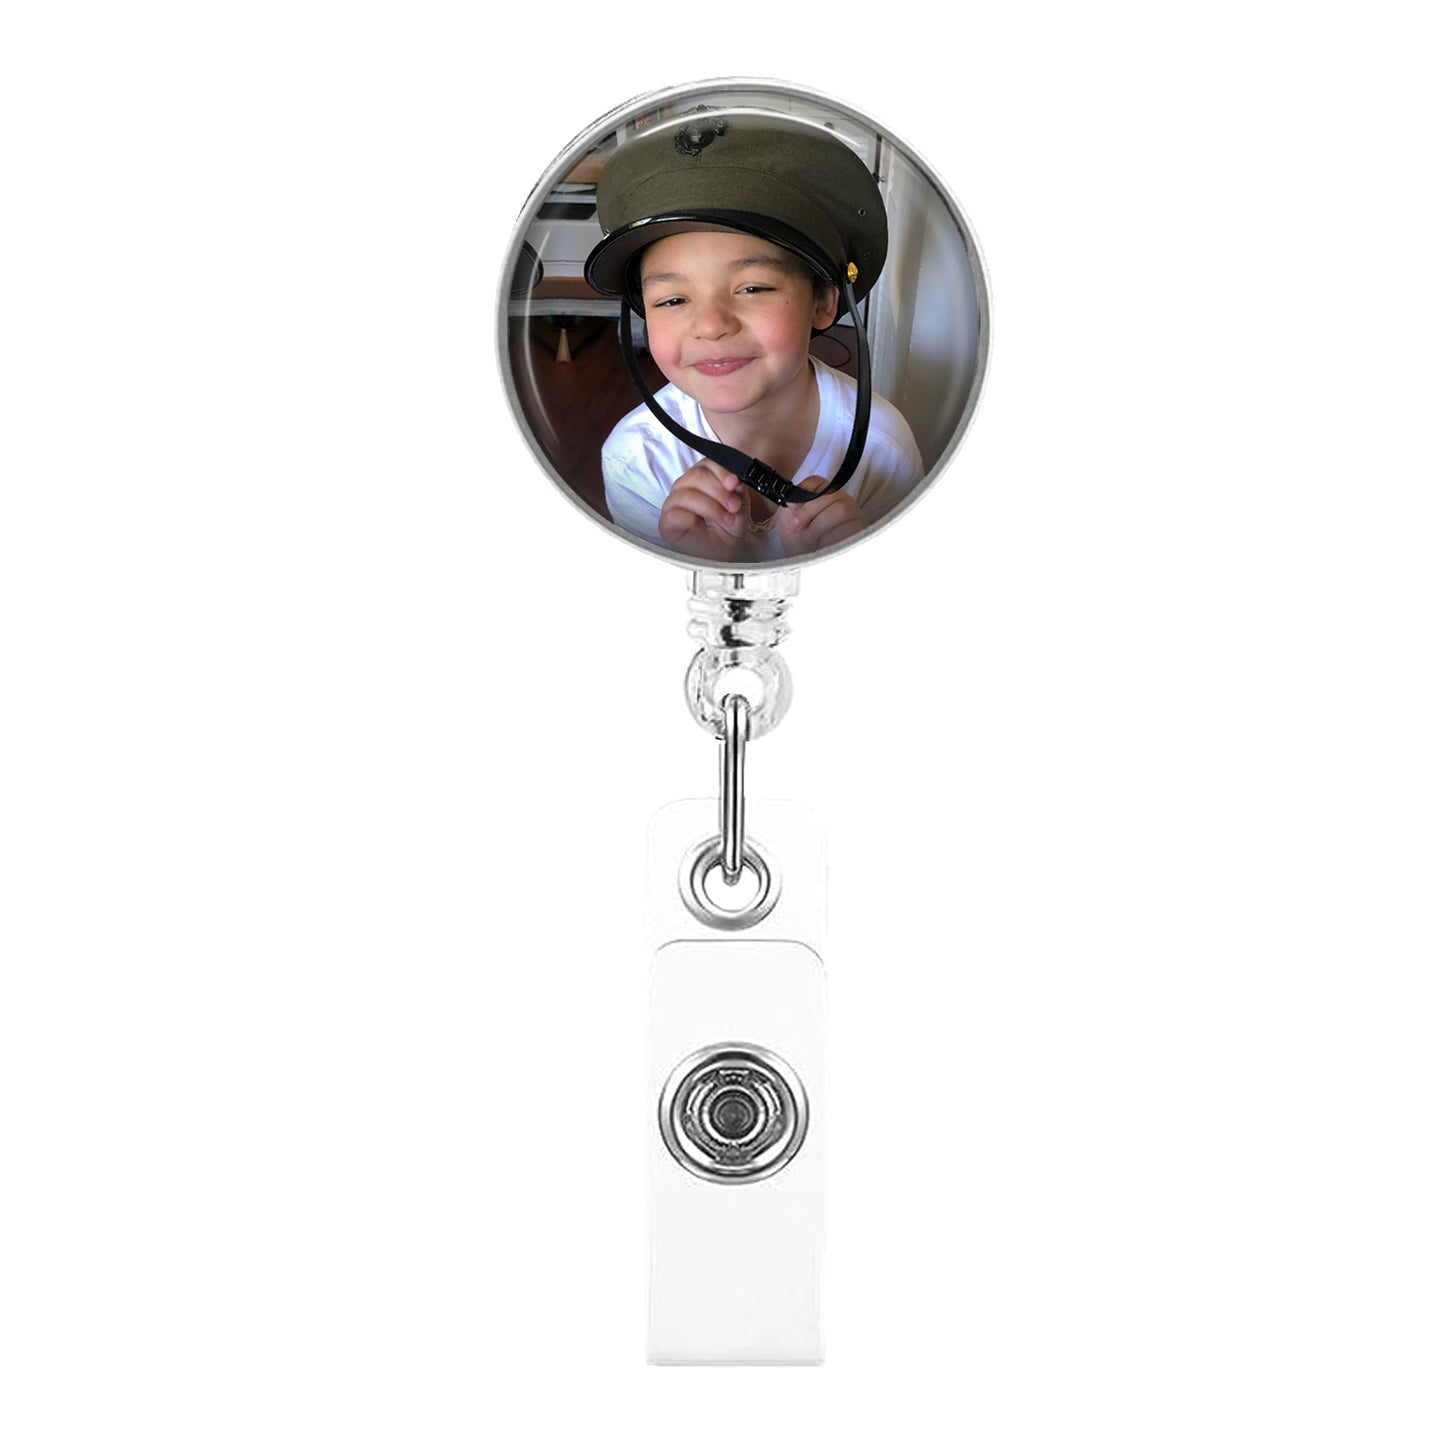 Retractable ID Badge Holder with your Photo - Perfect for Work or Events